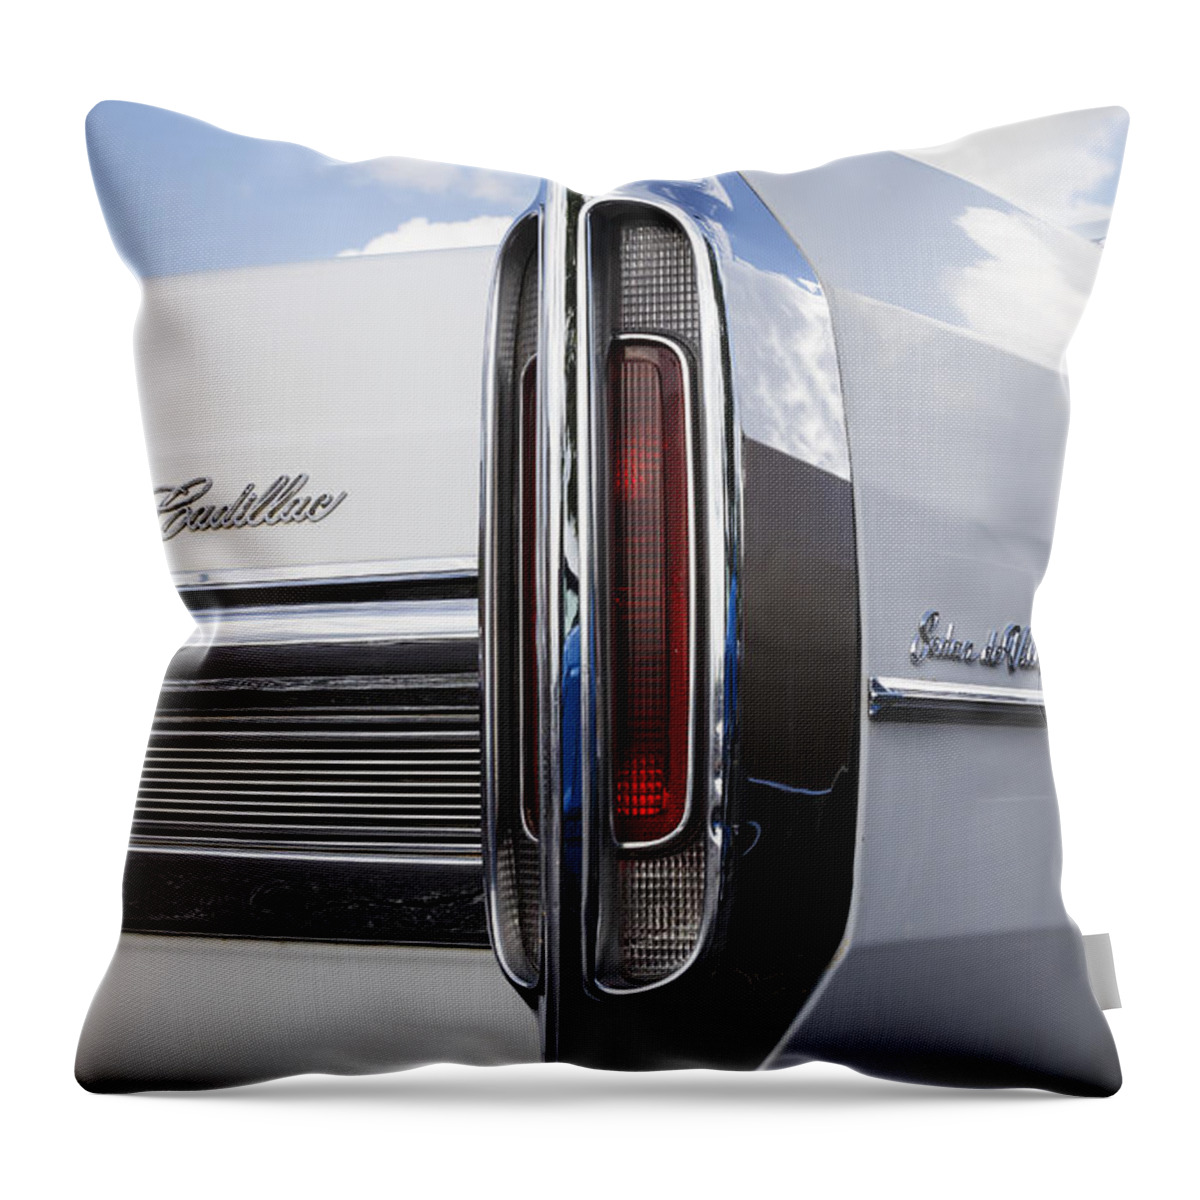 1966 Cadillac Throw Pillow featuring the photograph 1966 Cadillac by Dennis Hedberg